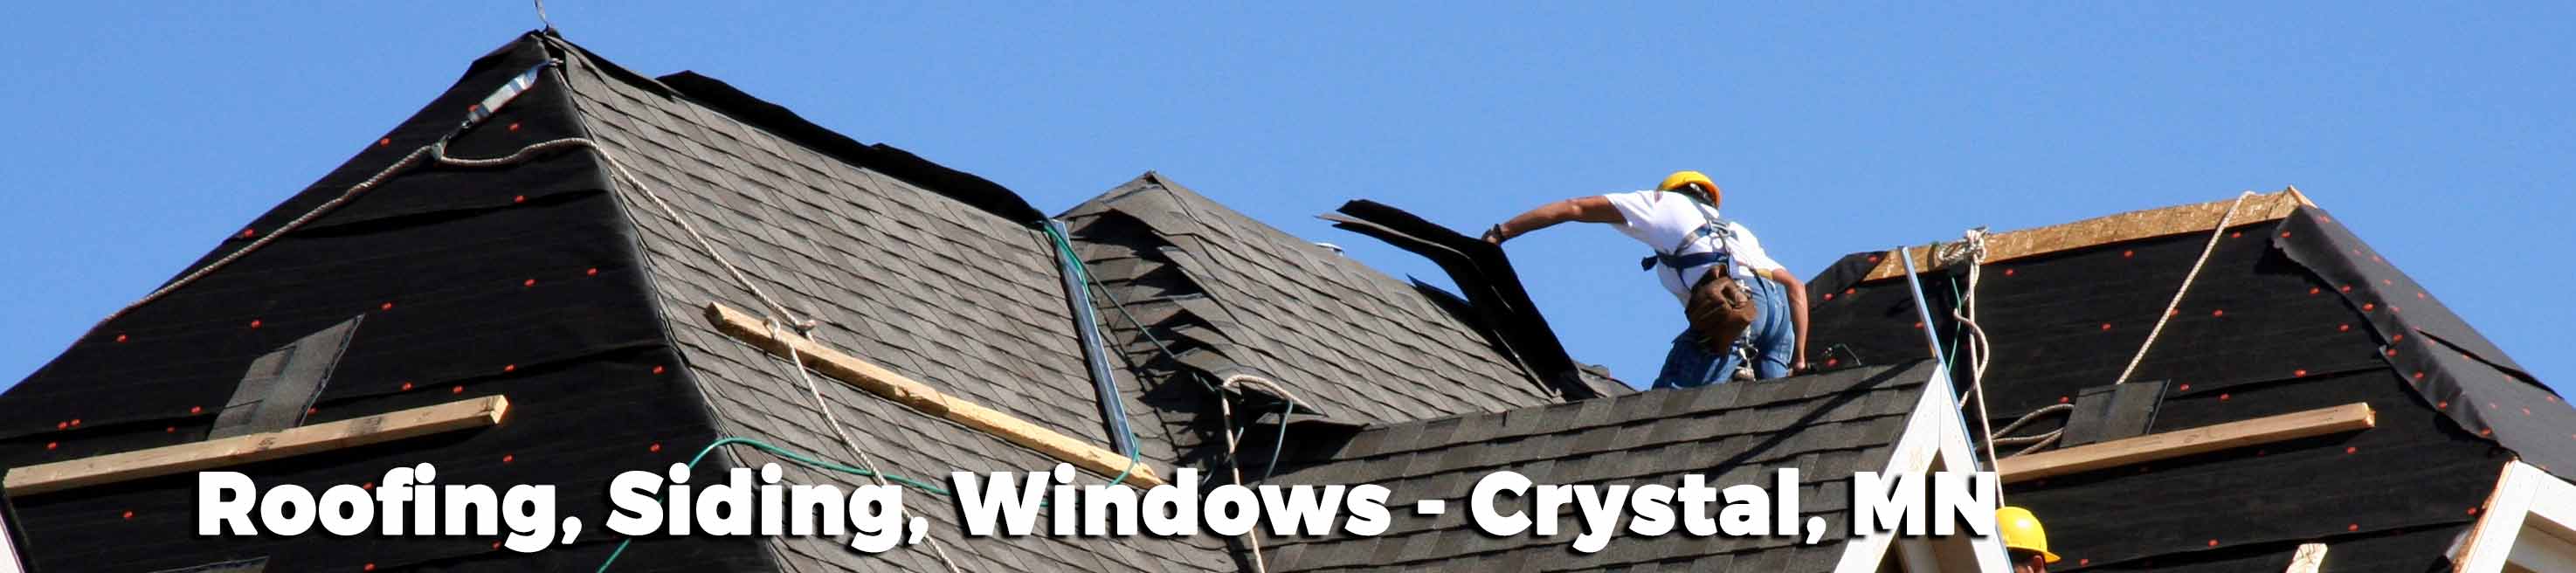 roofing-siding-windows-crystal-mn